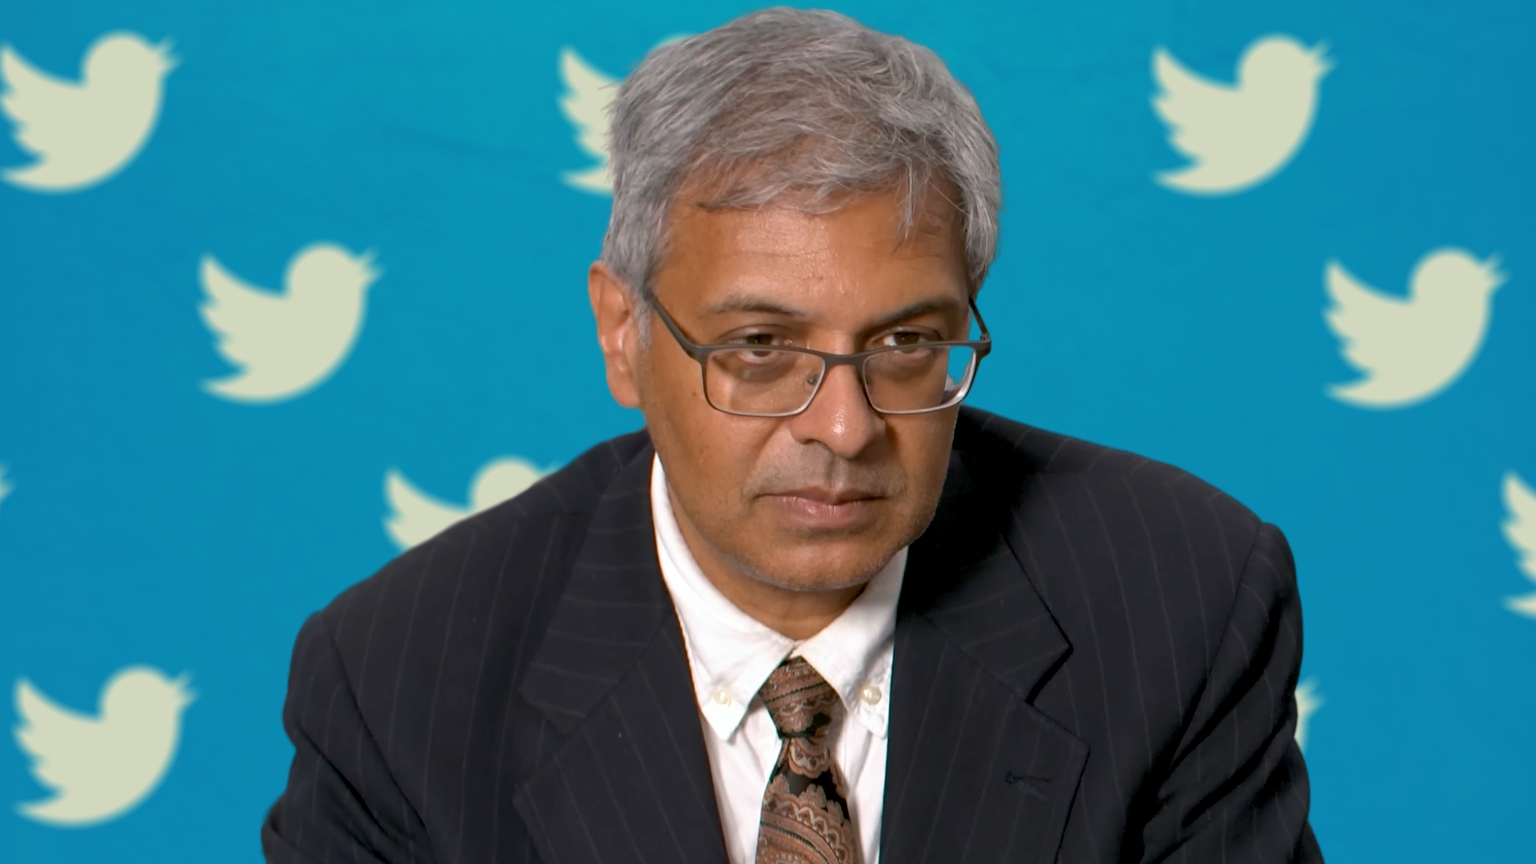 Dr. Jay Bhattacharya says he “strongly” suspects federal government directed Twitter to blacklist his account